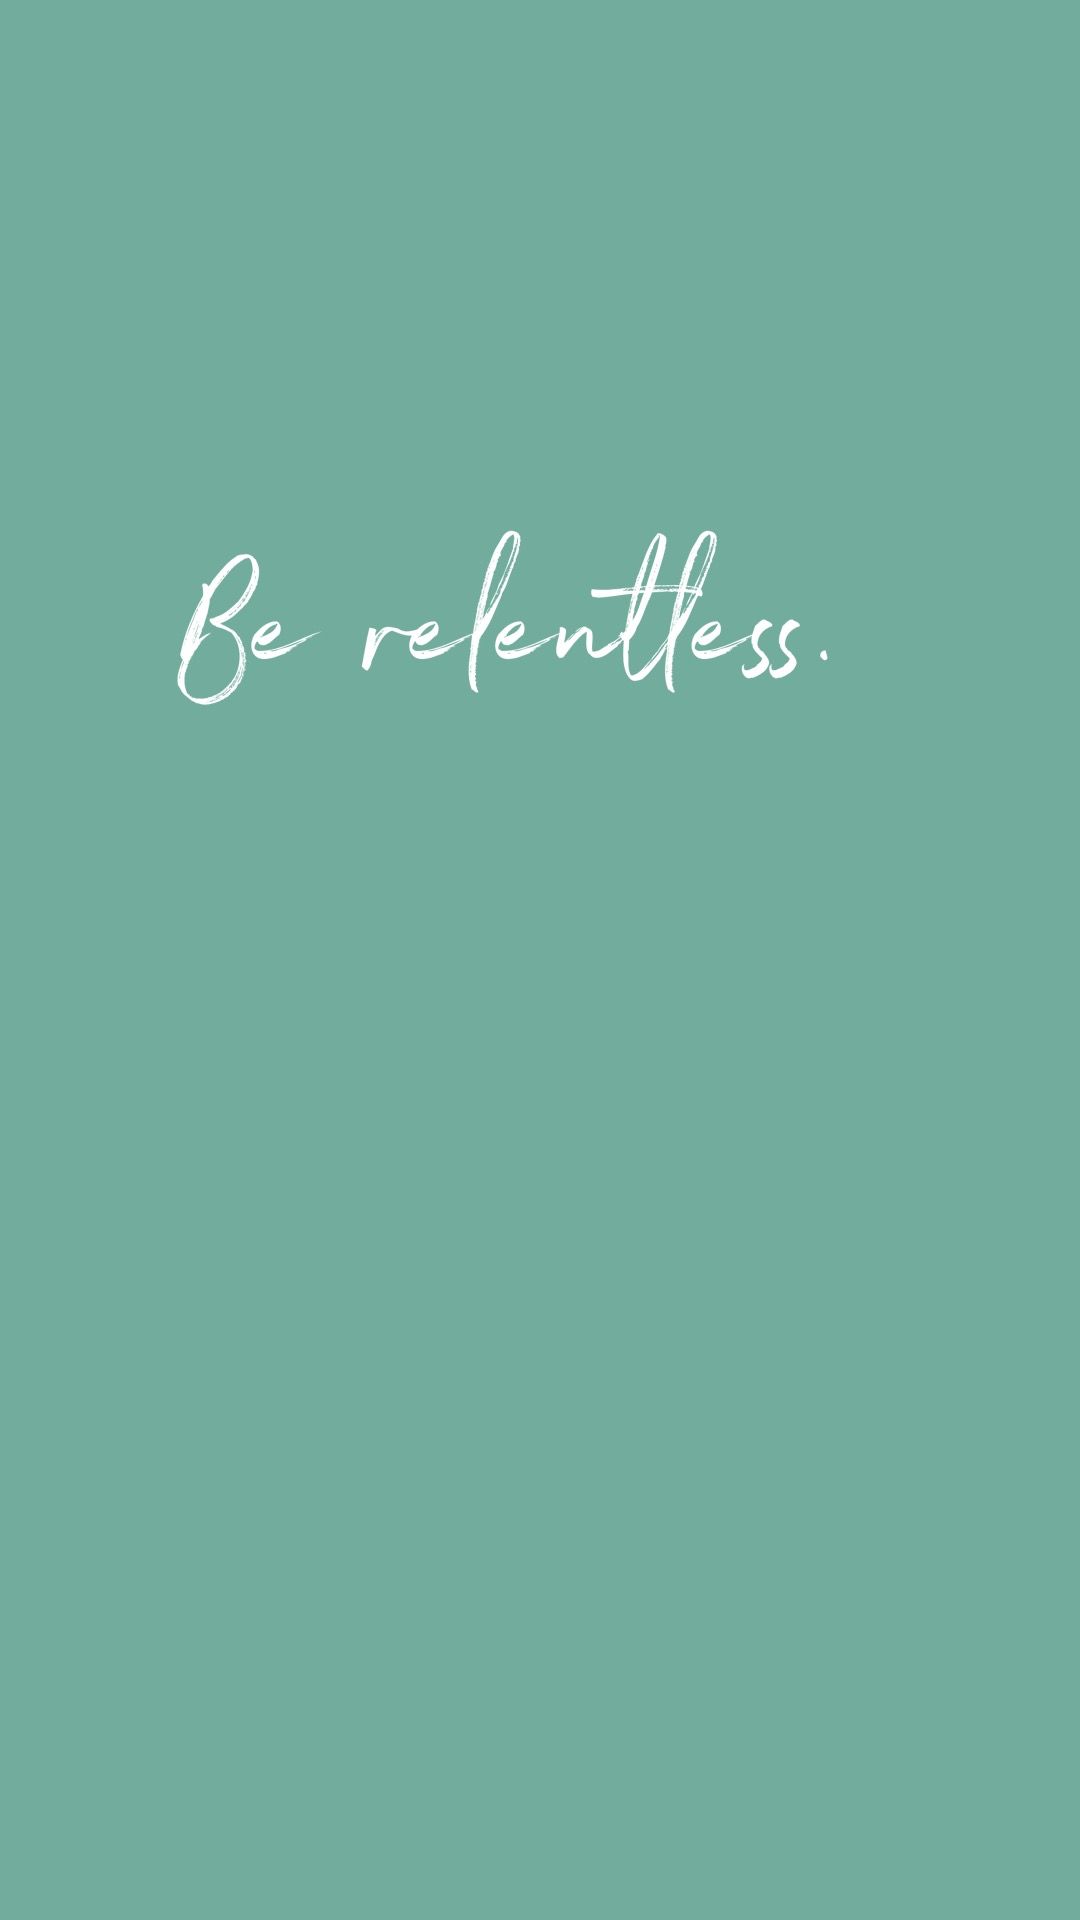 Be Relentless Quotes Inspirational